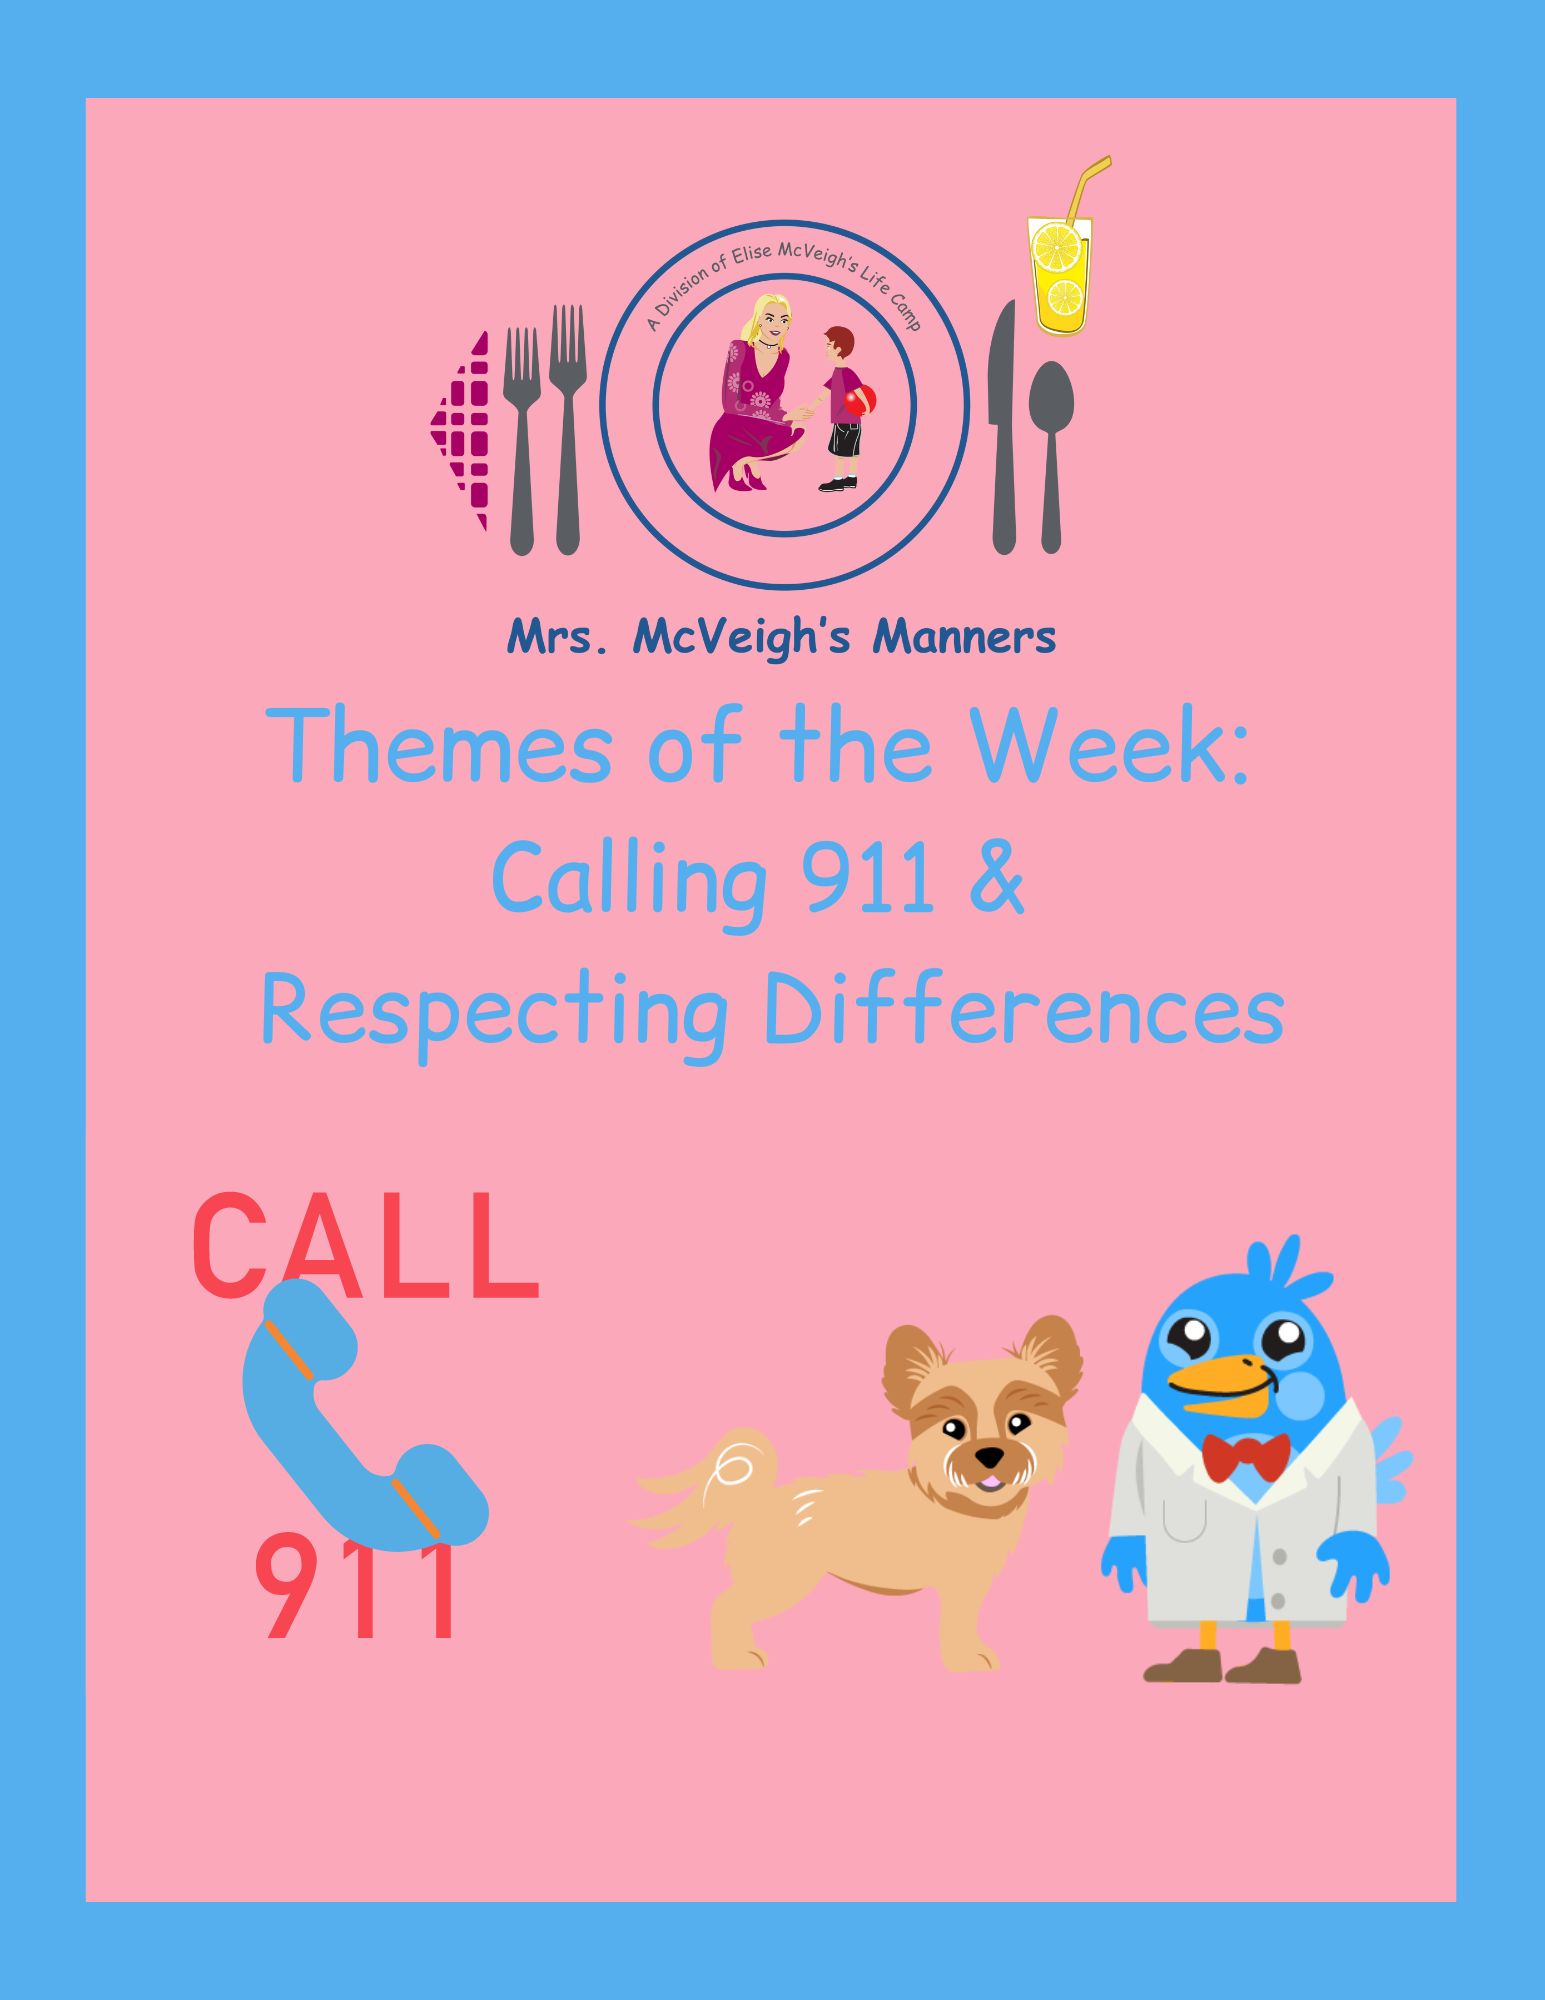 Calling 911 & Respecting Differences – Themes of the Week